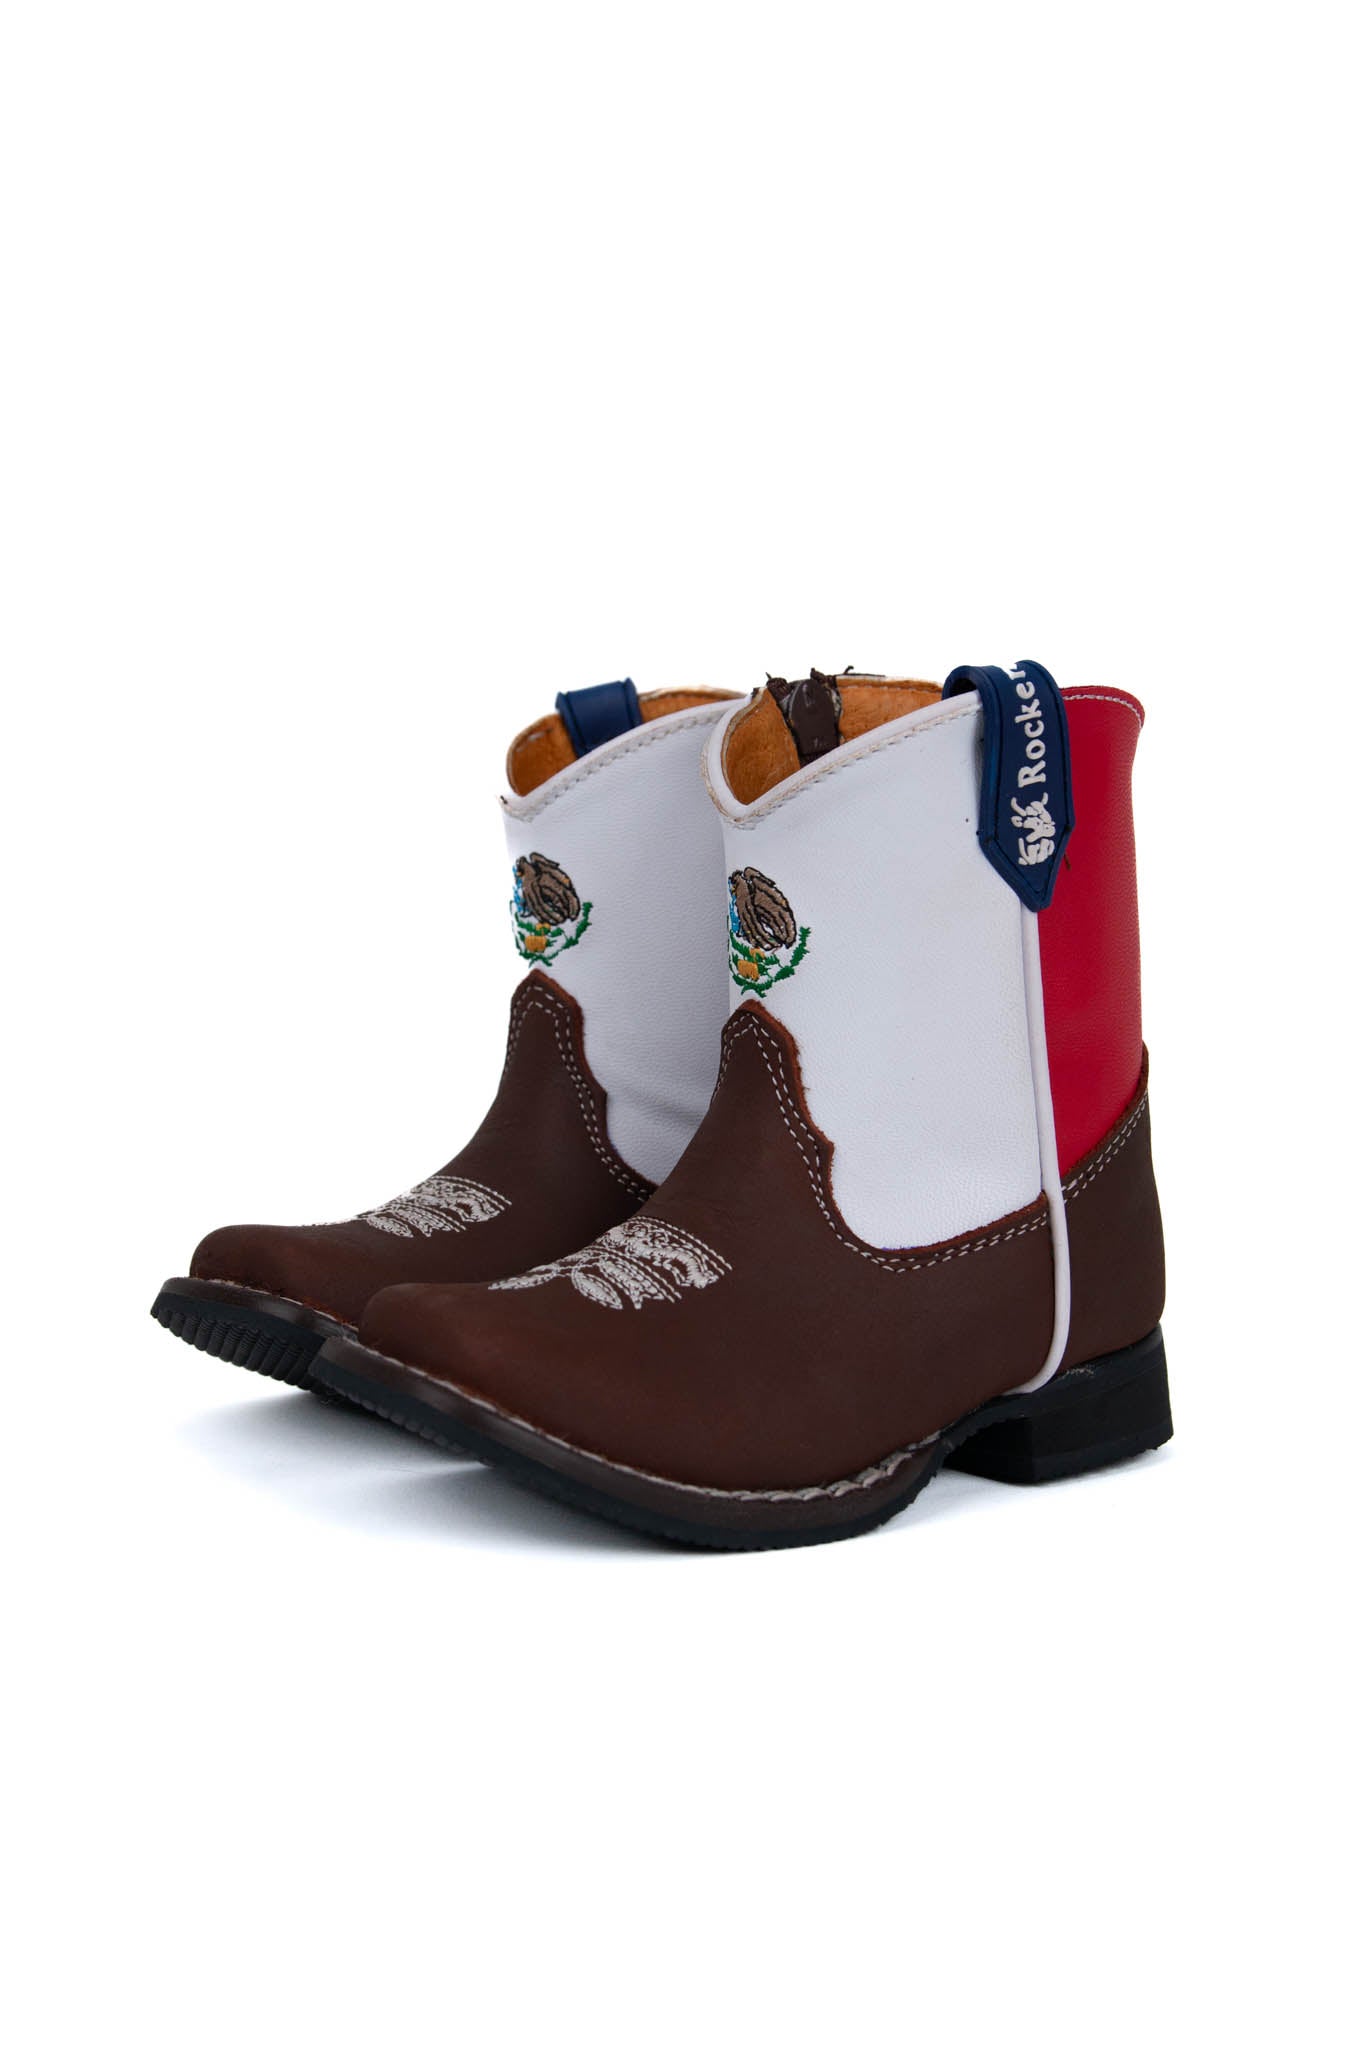 Baby Boy Mexico Boots